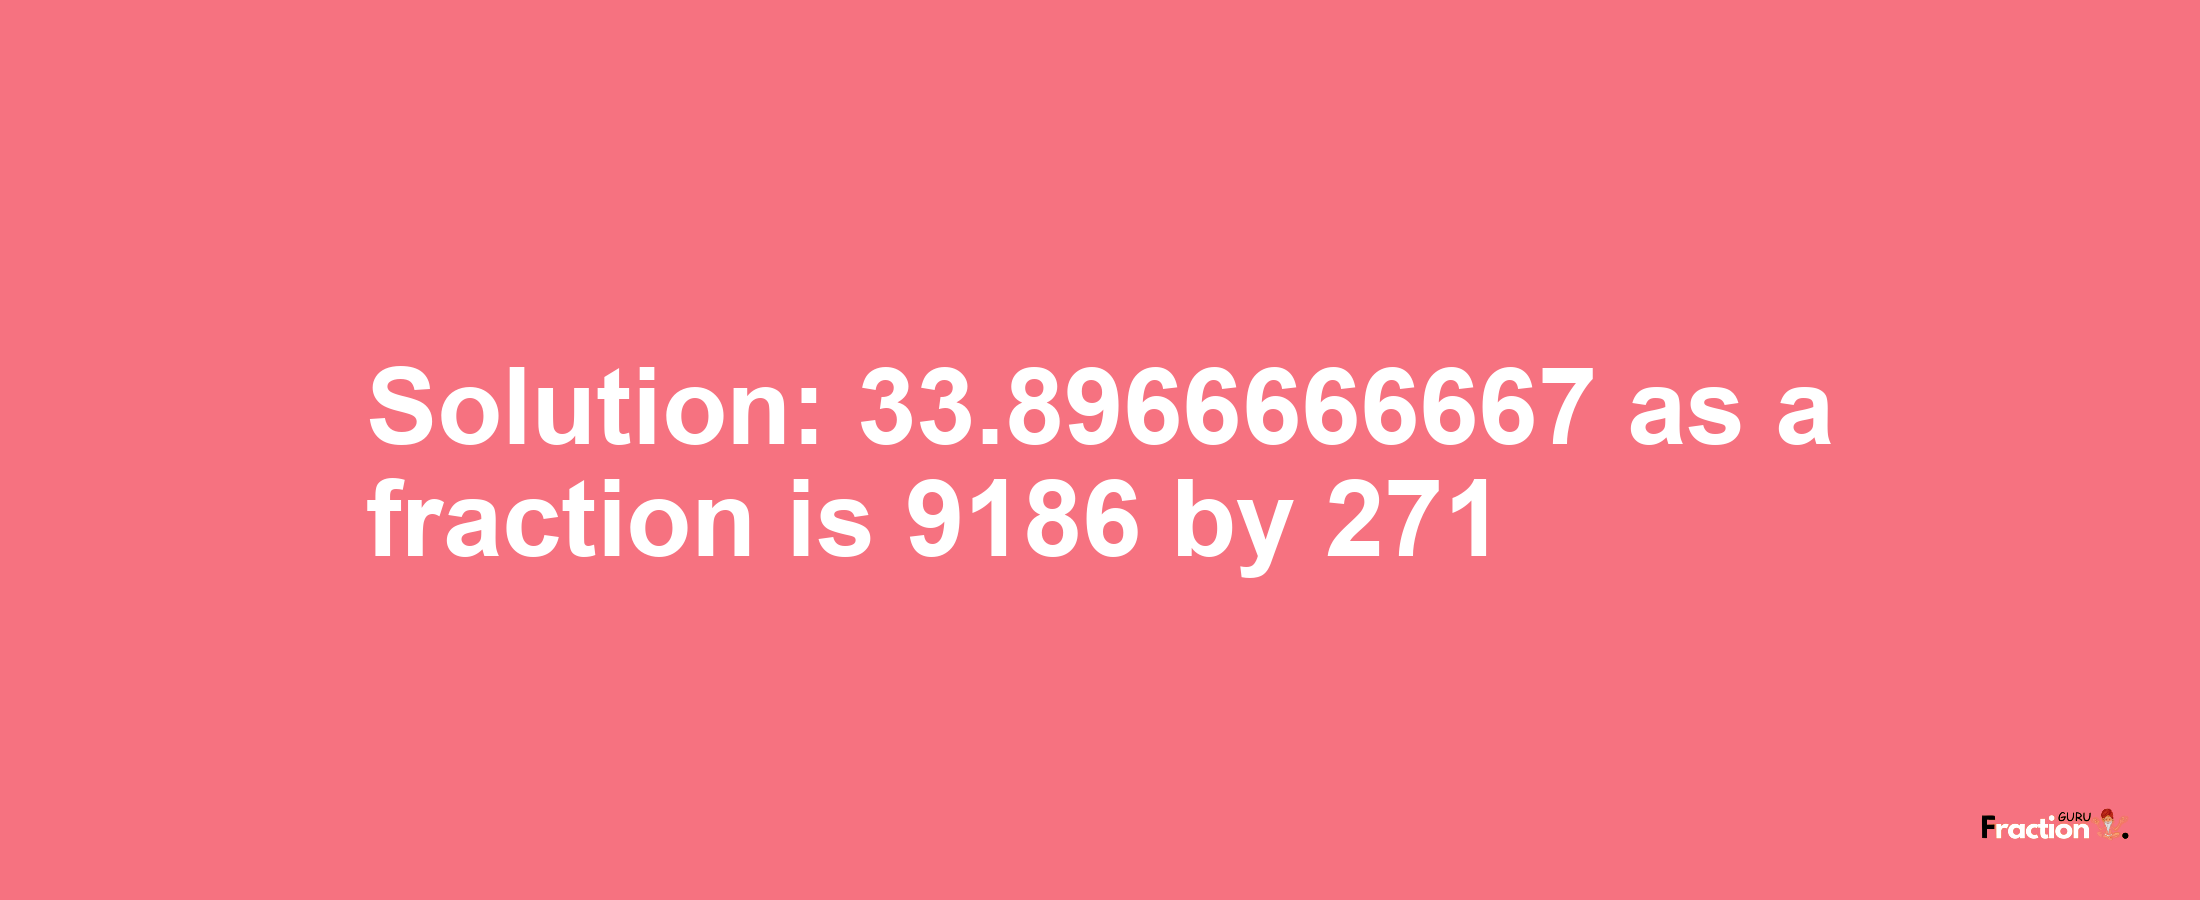 Solution:33.8966666667 as a fraction is 9186/271